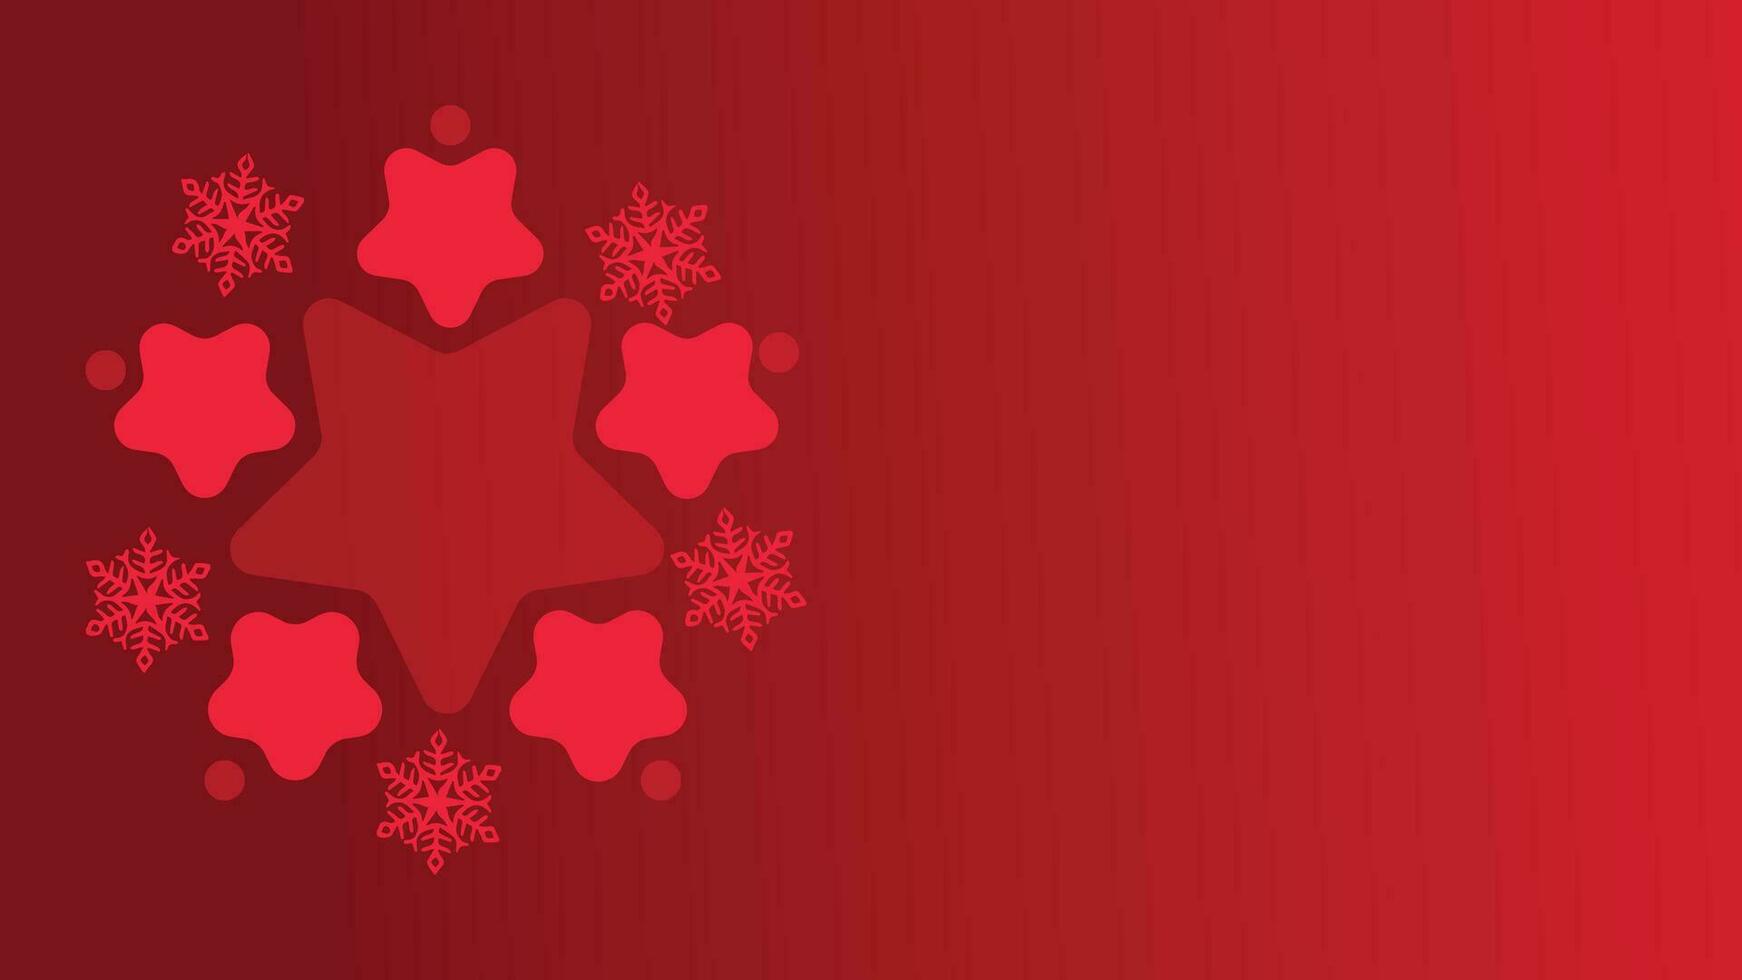 Abstract Christmas ornaments in red and white background. This creative minimal background will make your project more stunning and interesting.You can use this background as banner or party flyer. vector